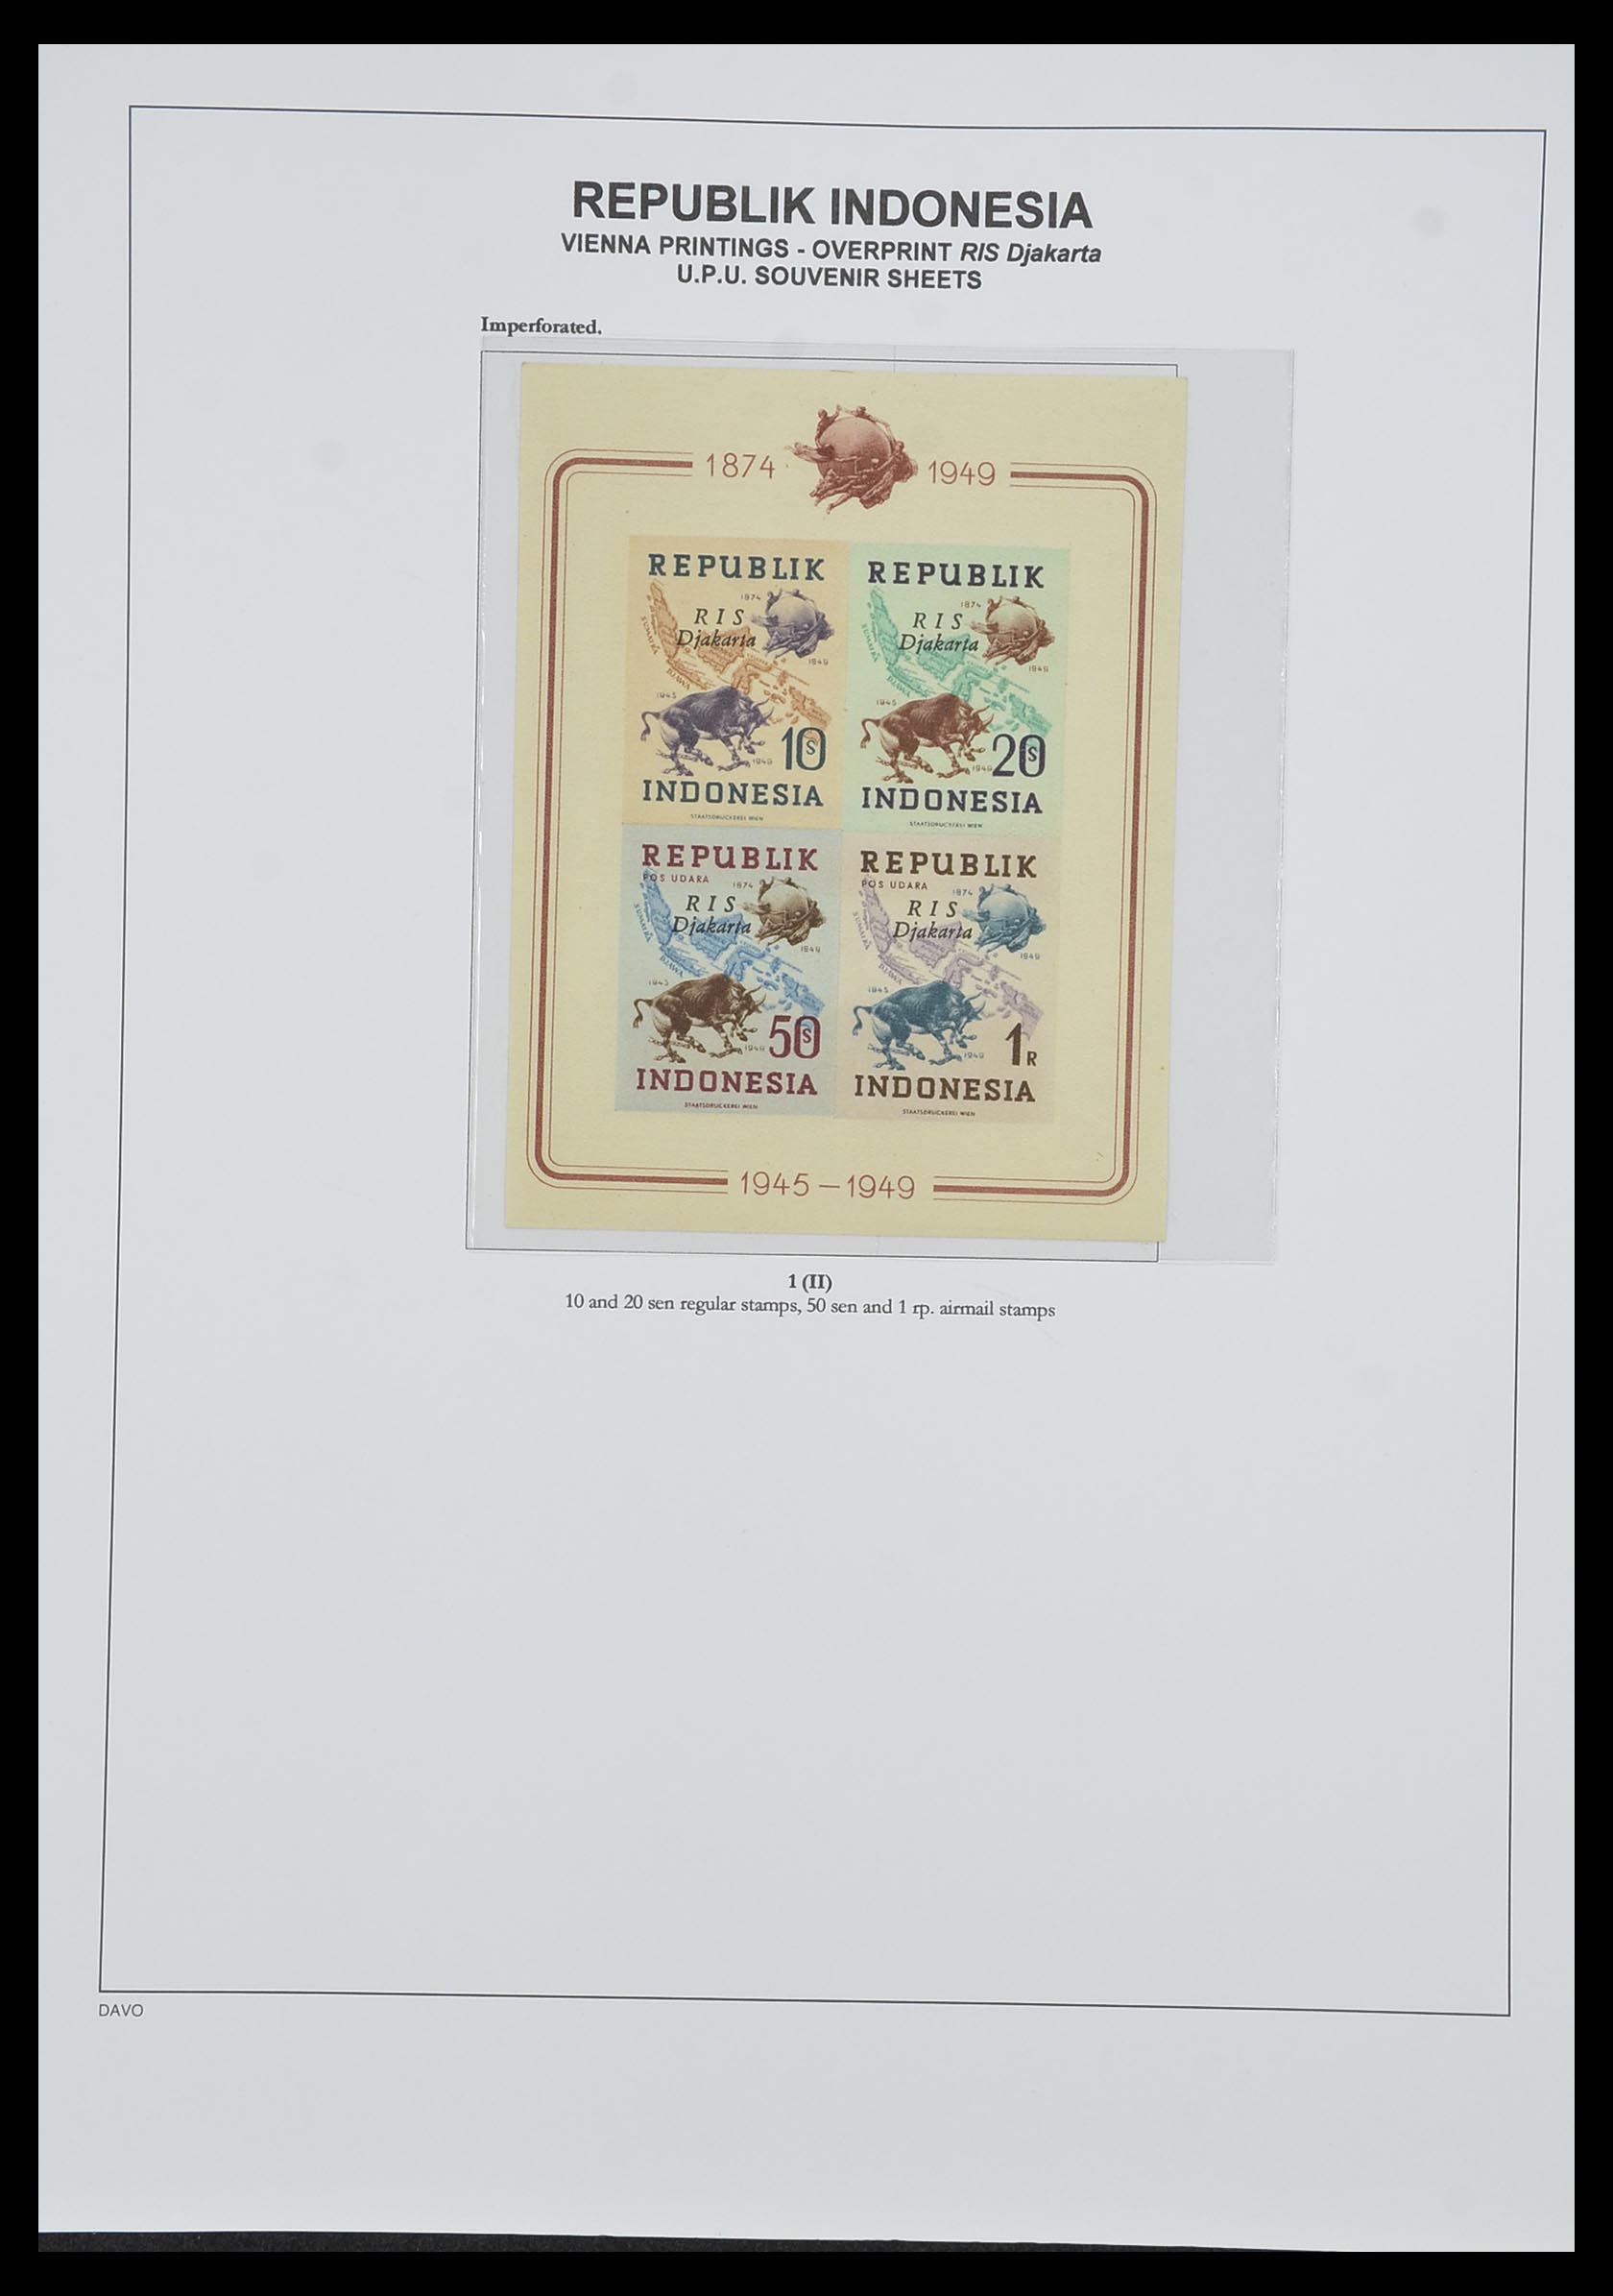 33988 051 - Stamp collection 33988 Vienna printings Indonesia.